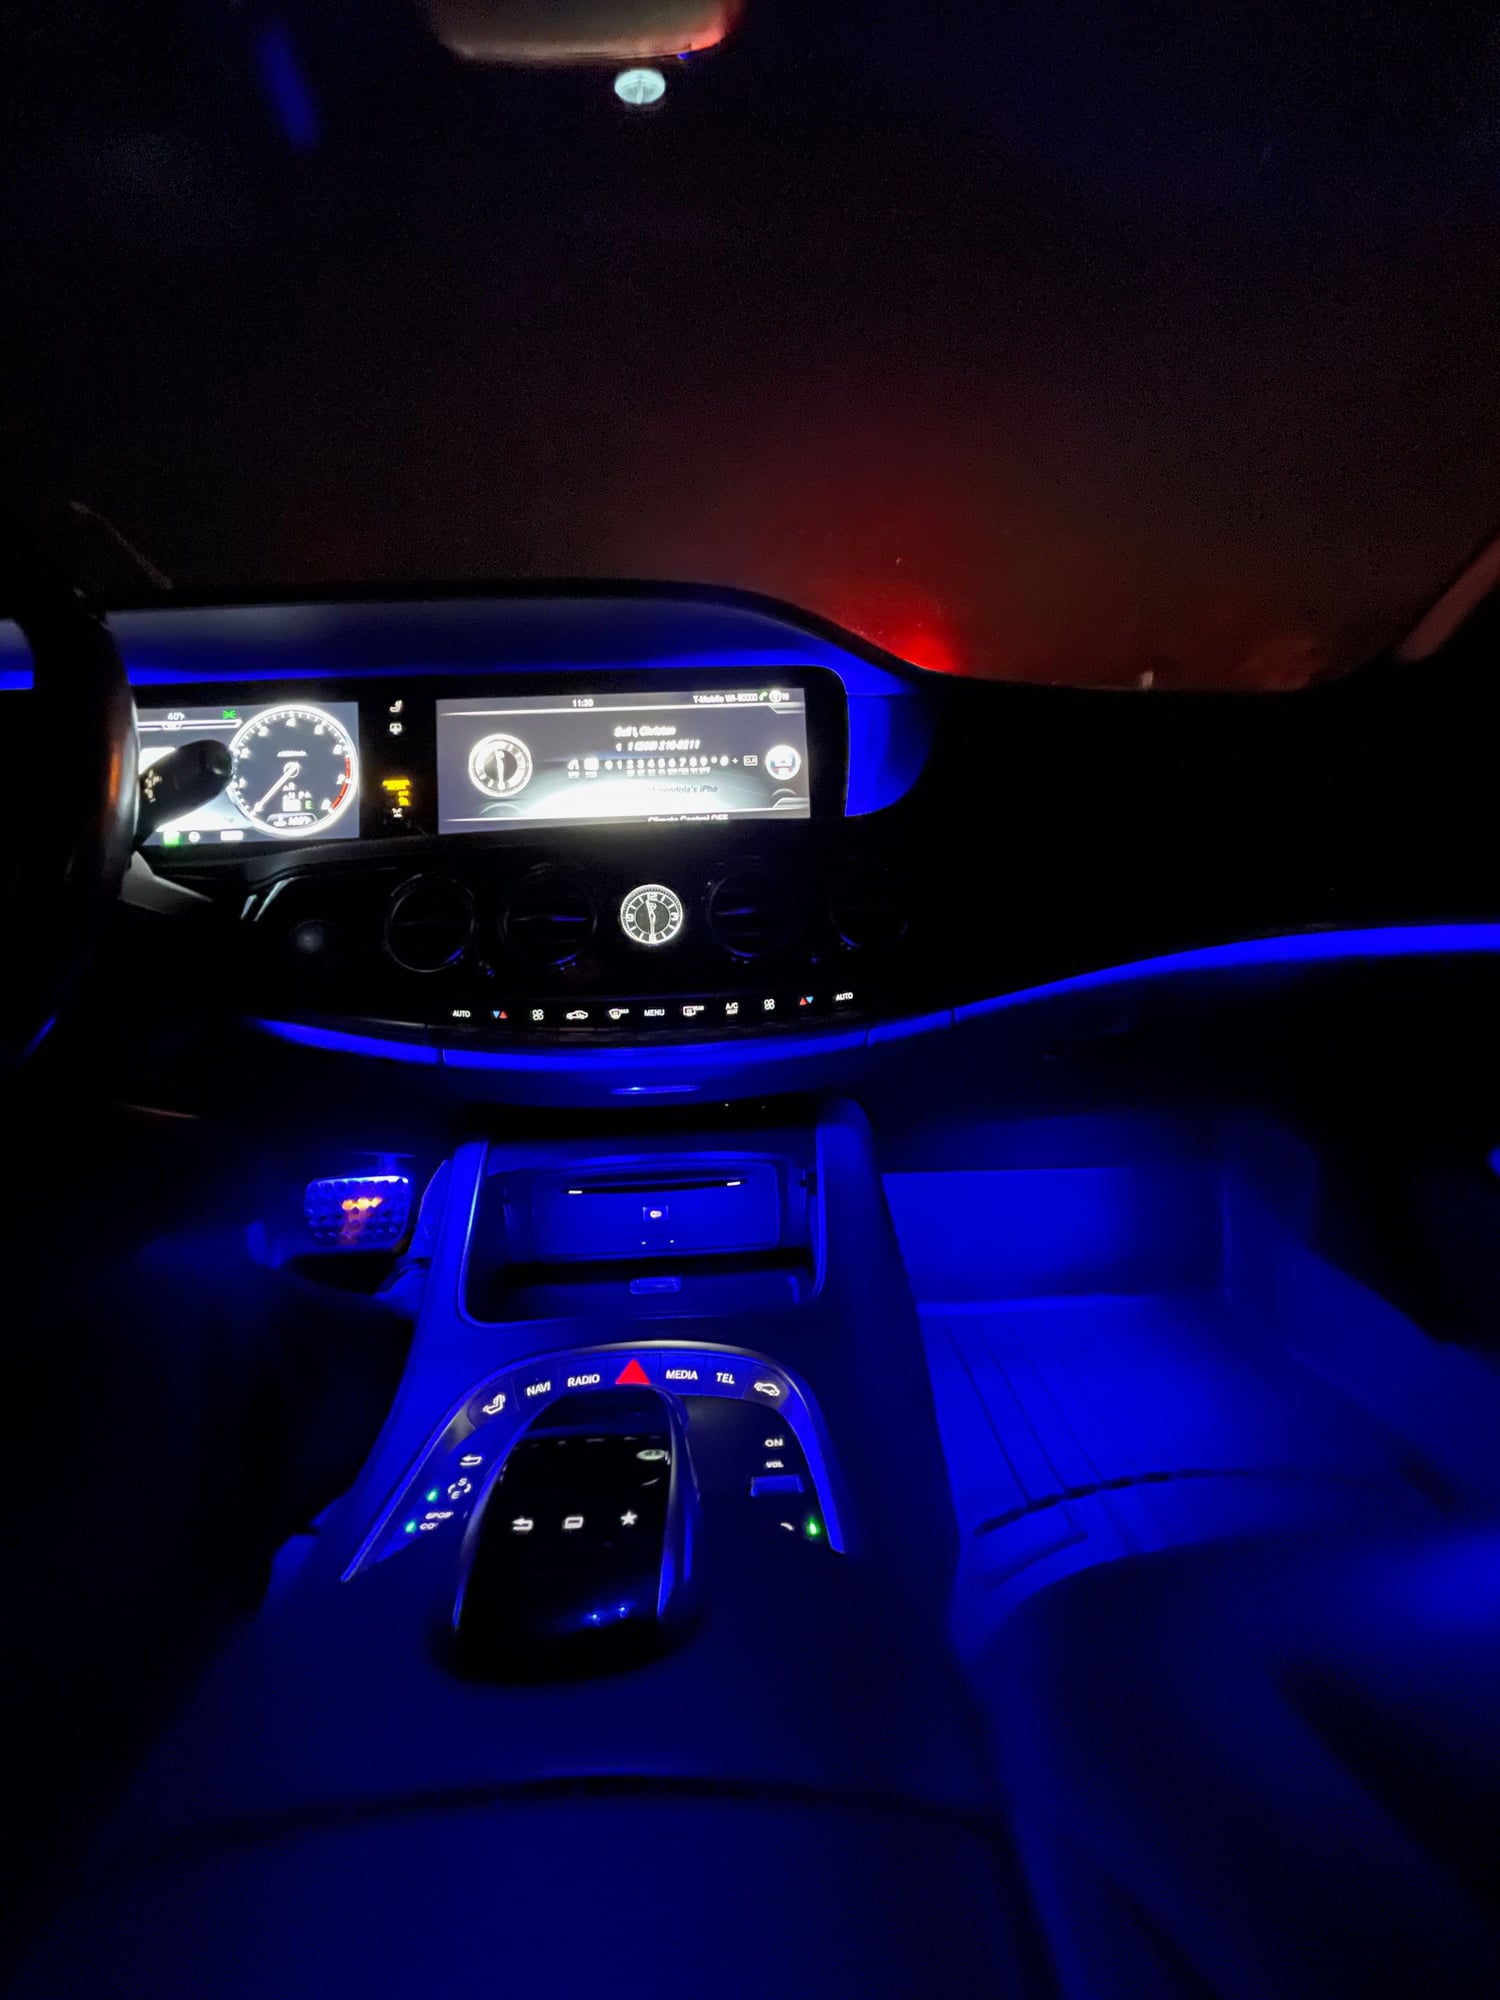 Ambient Lighting Not Working on w222 after Blend Doors fixed - MBWorld ...